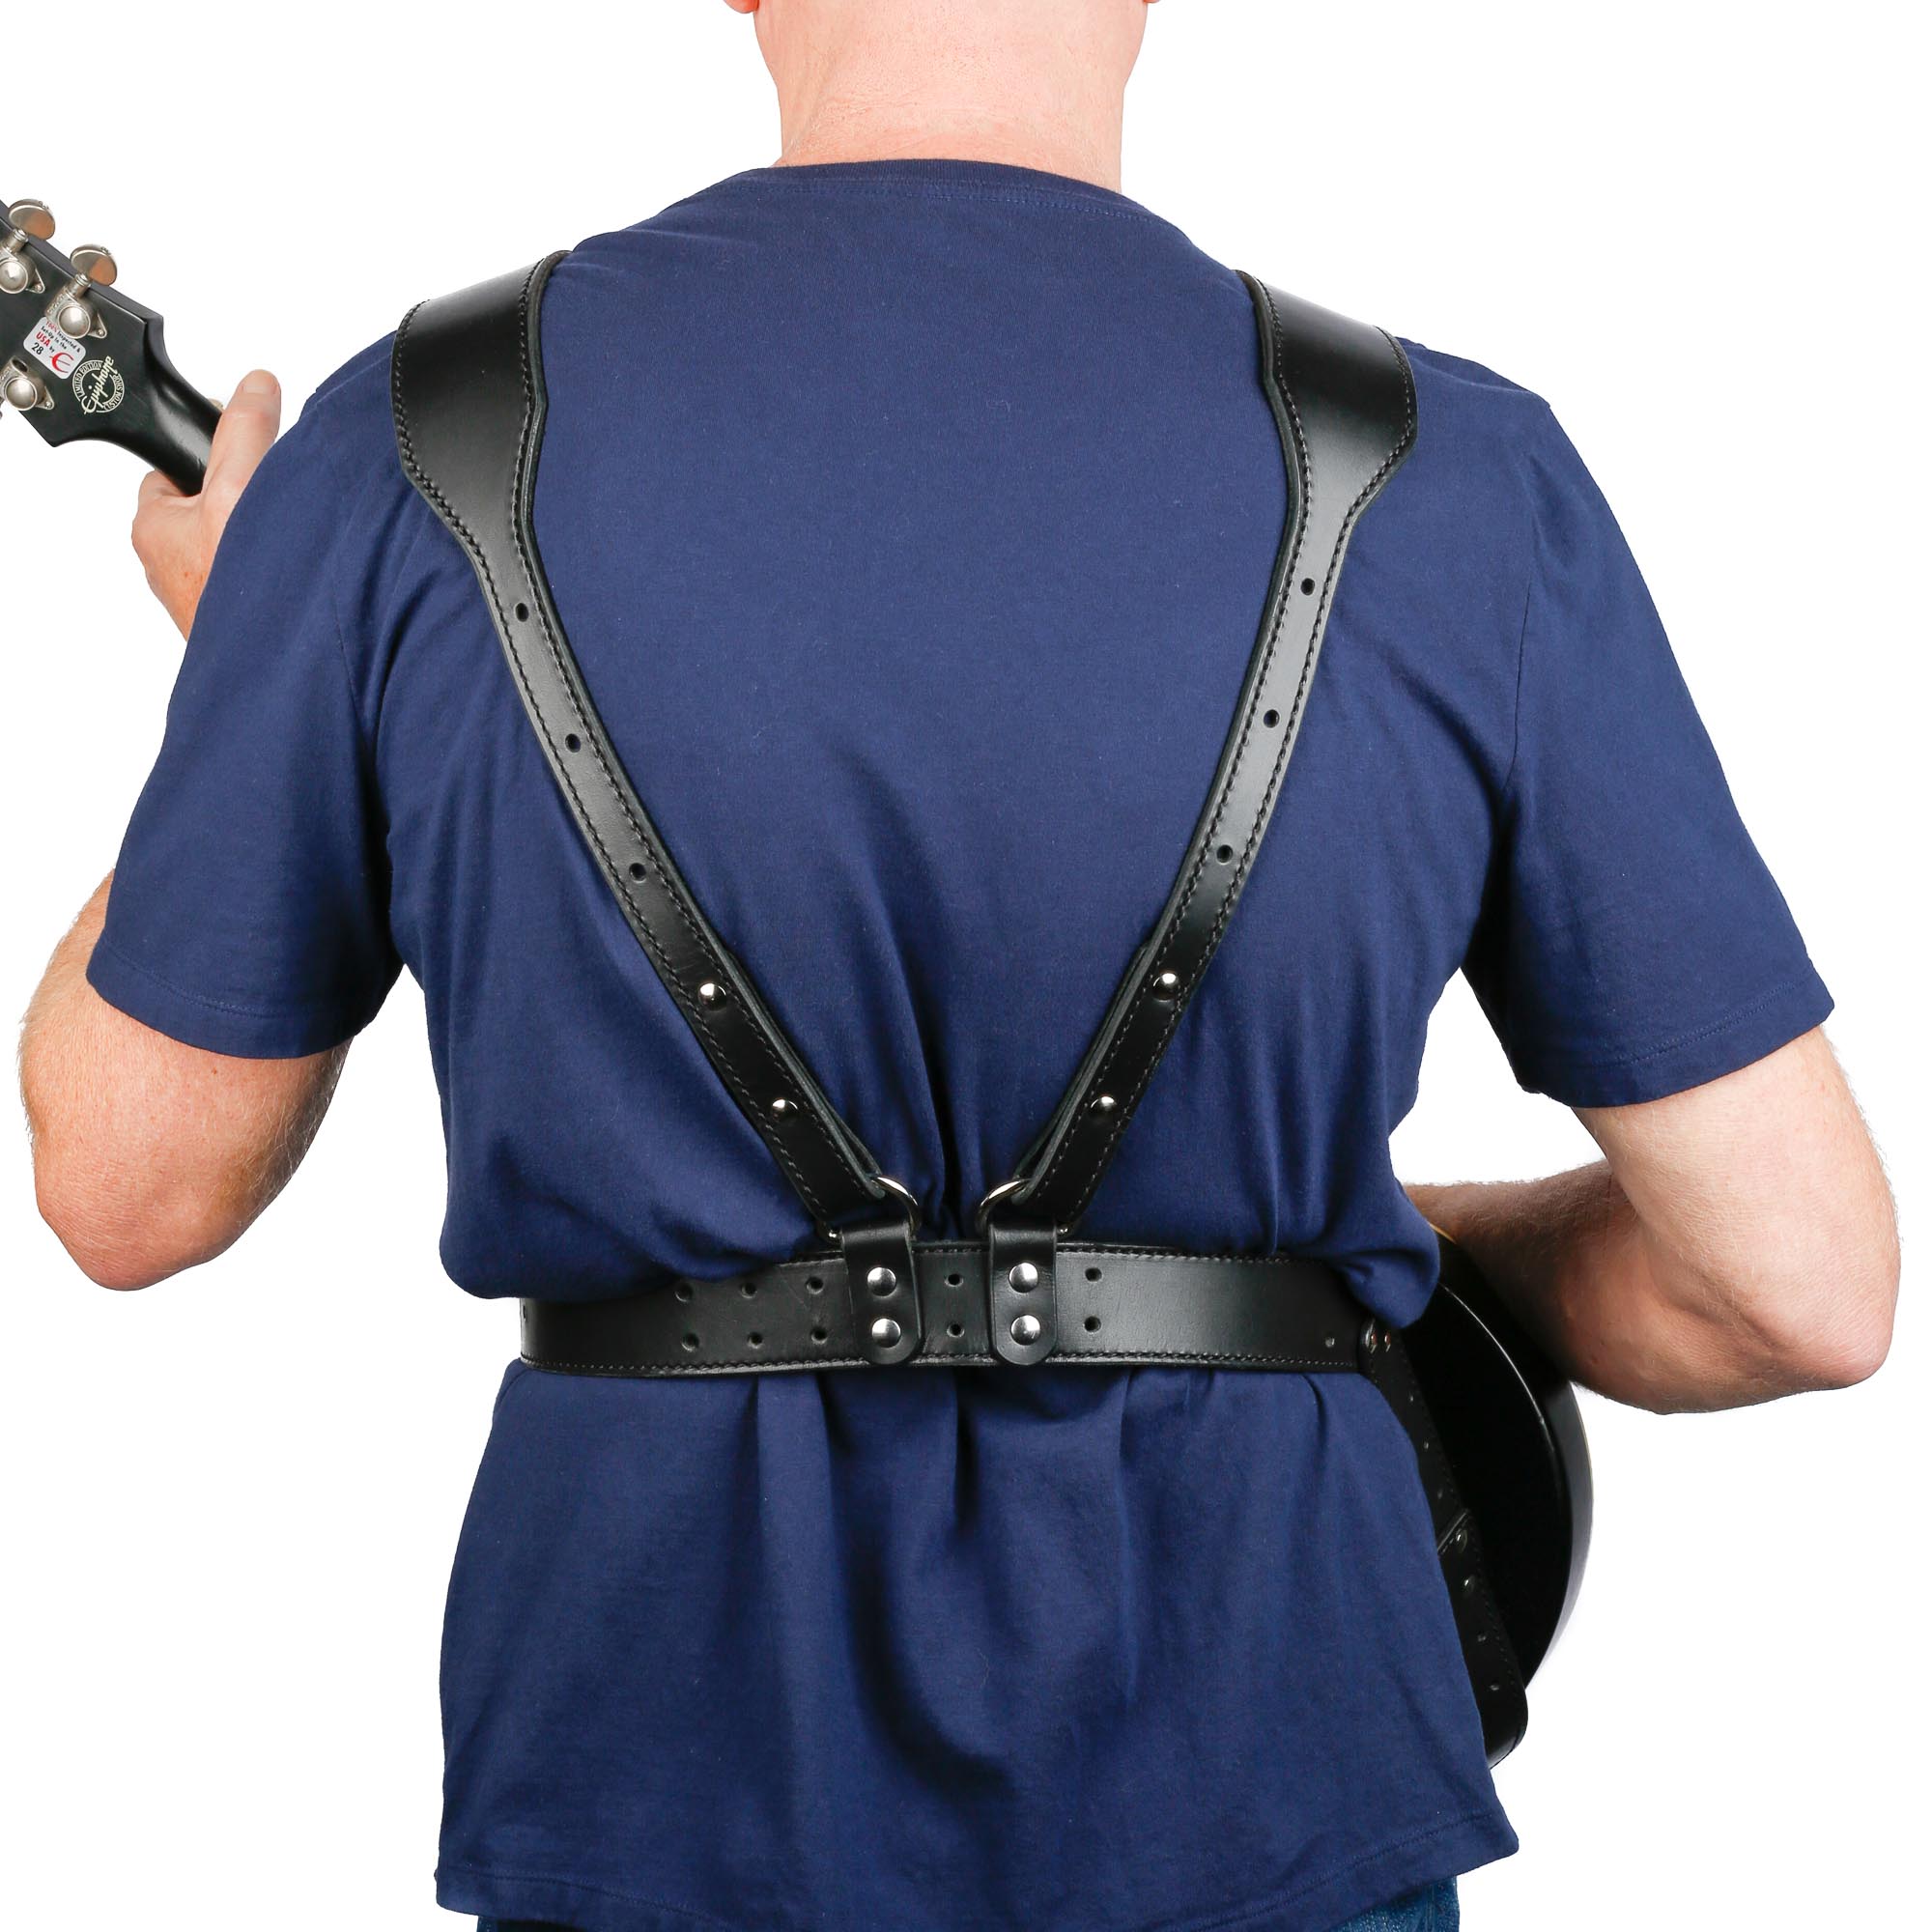 rear view of black leather harness strap with gibson lea paul